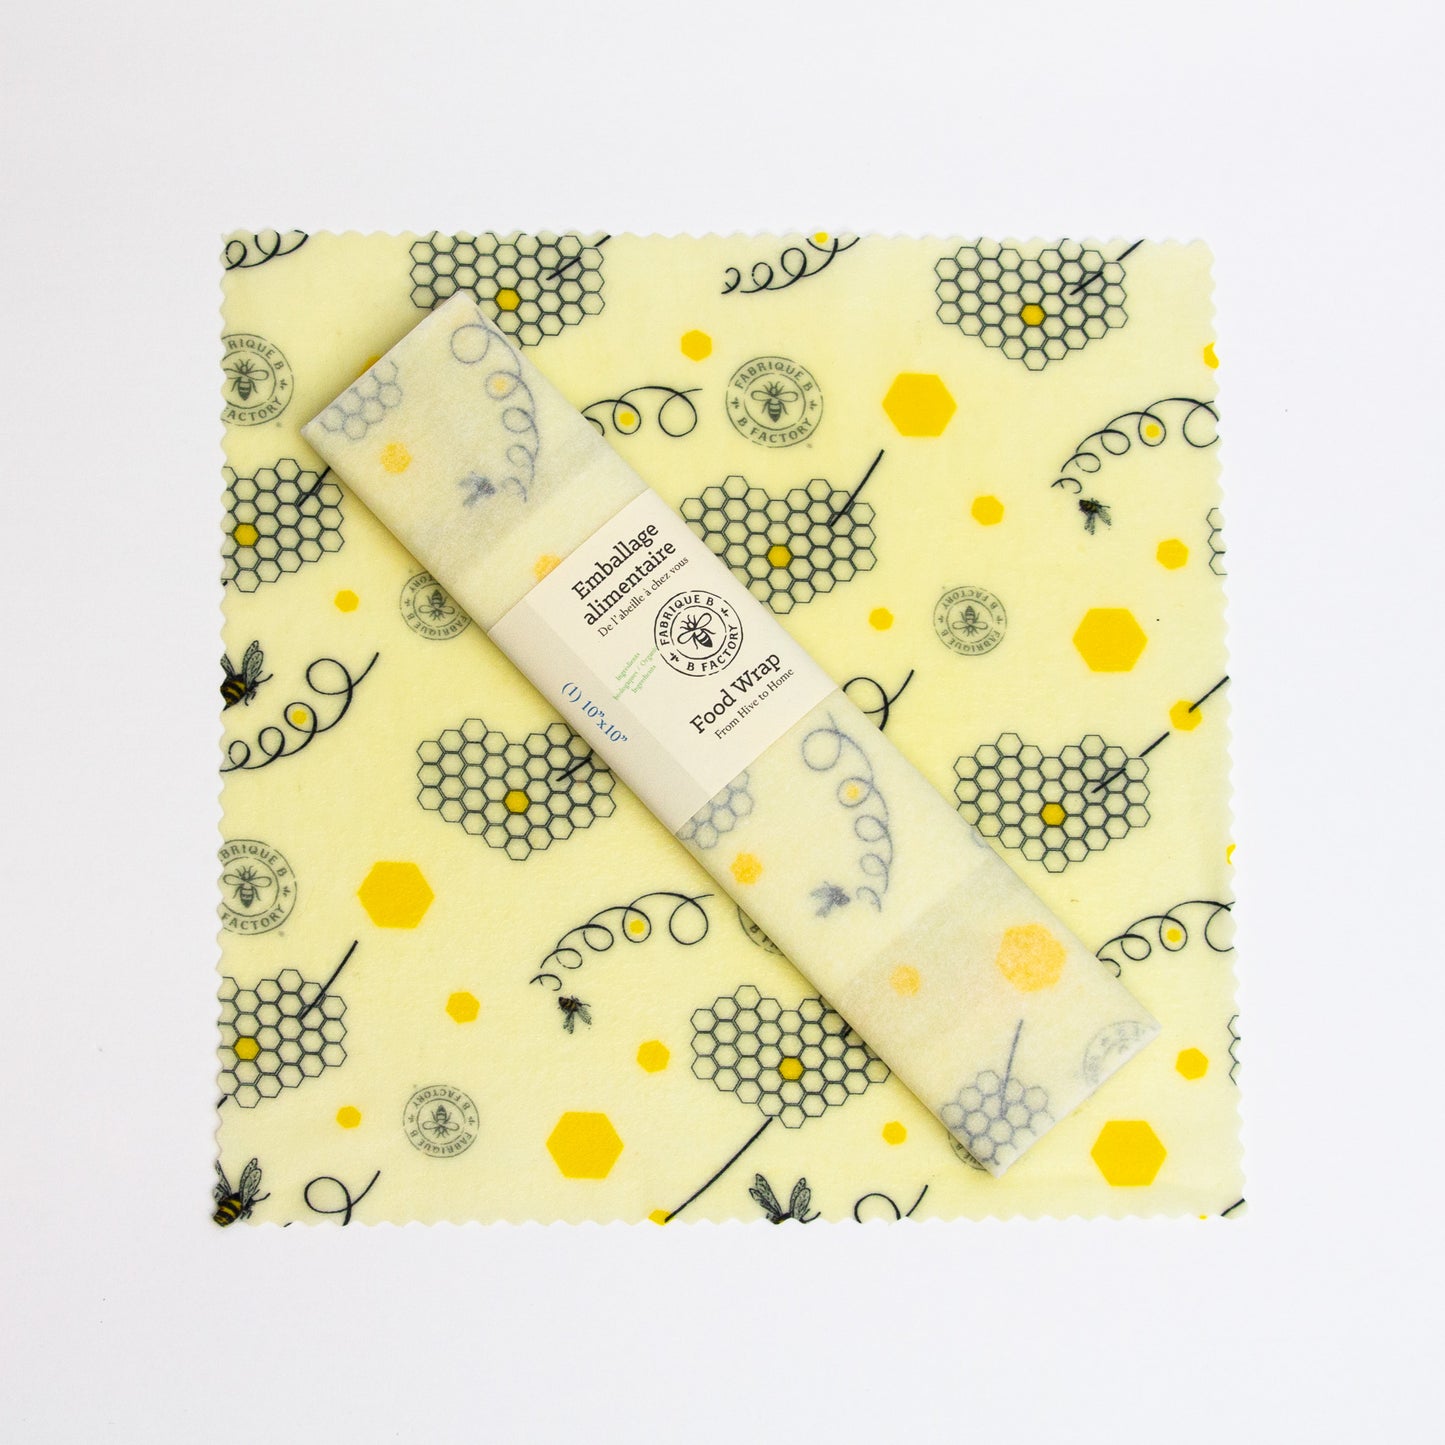 A 10-inch square patterned beeswax food wrap with honeycomb and bee design and a wrapped beeswax wrap sitting on top with B Factory logo